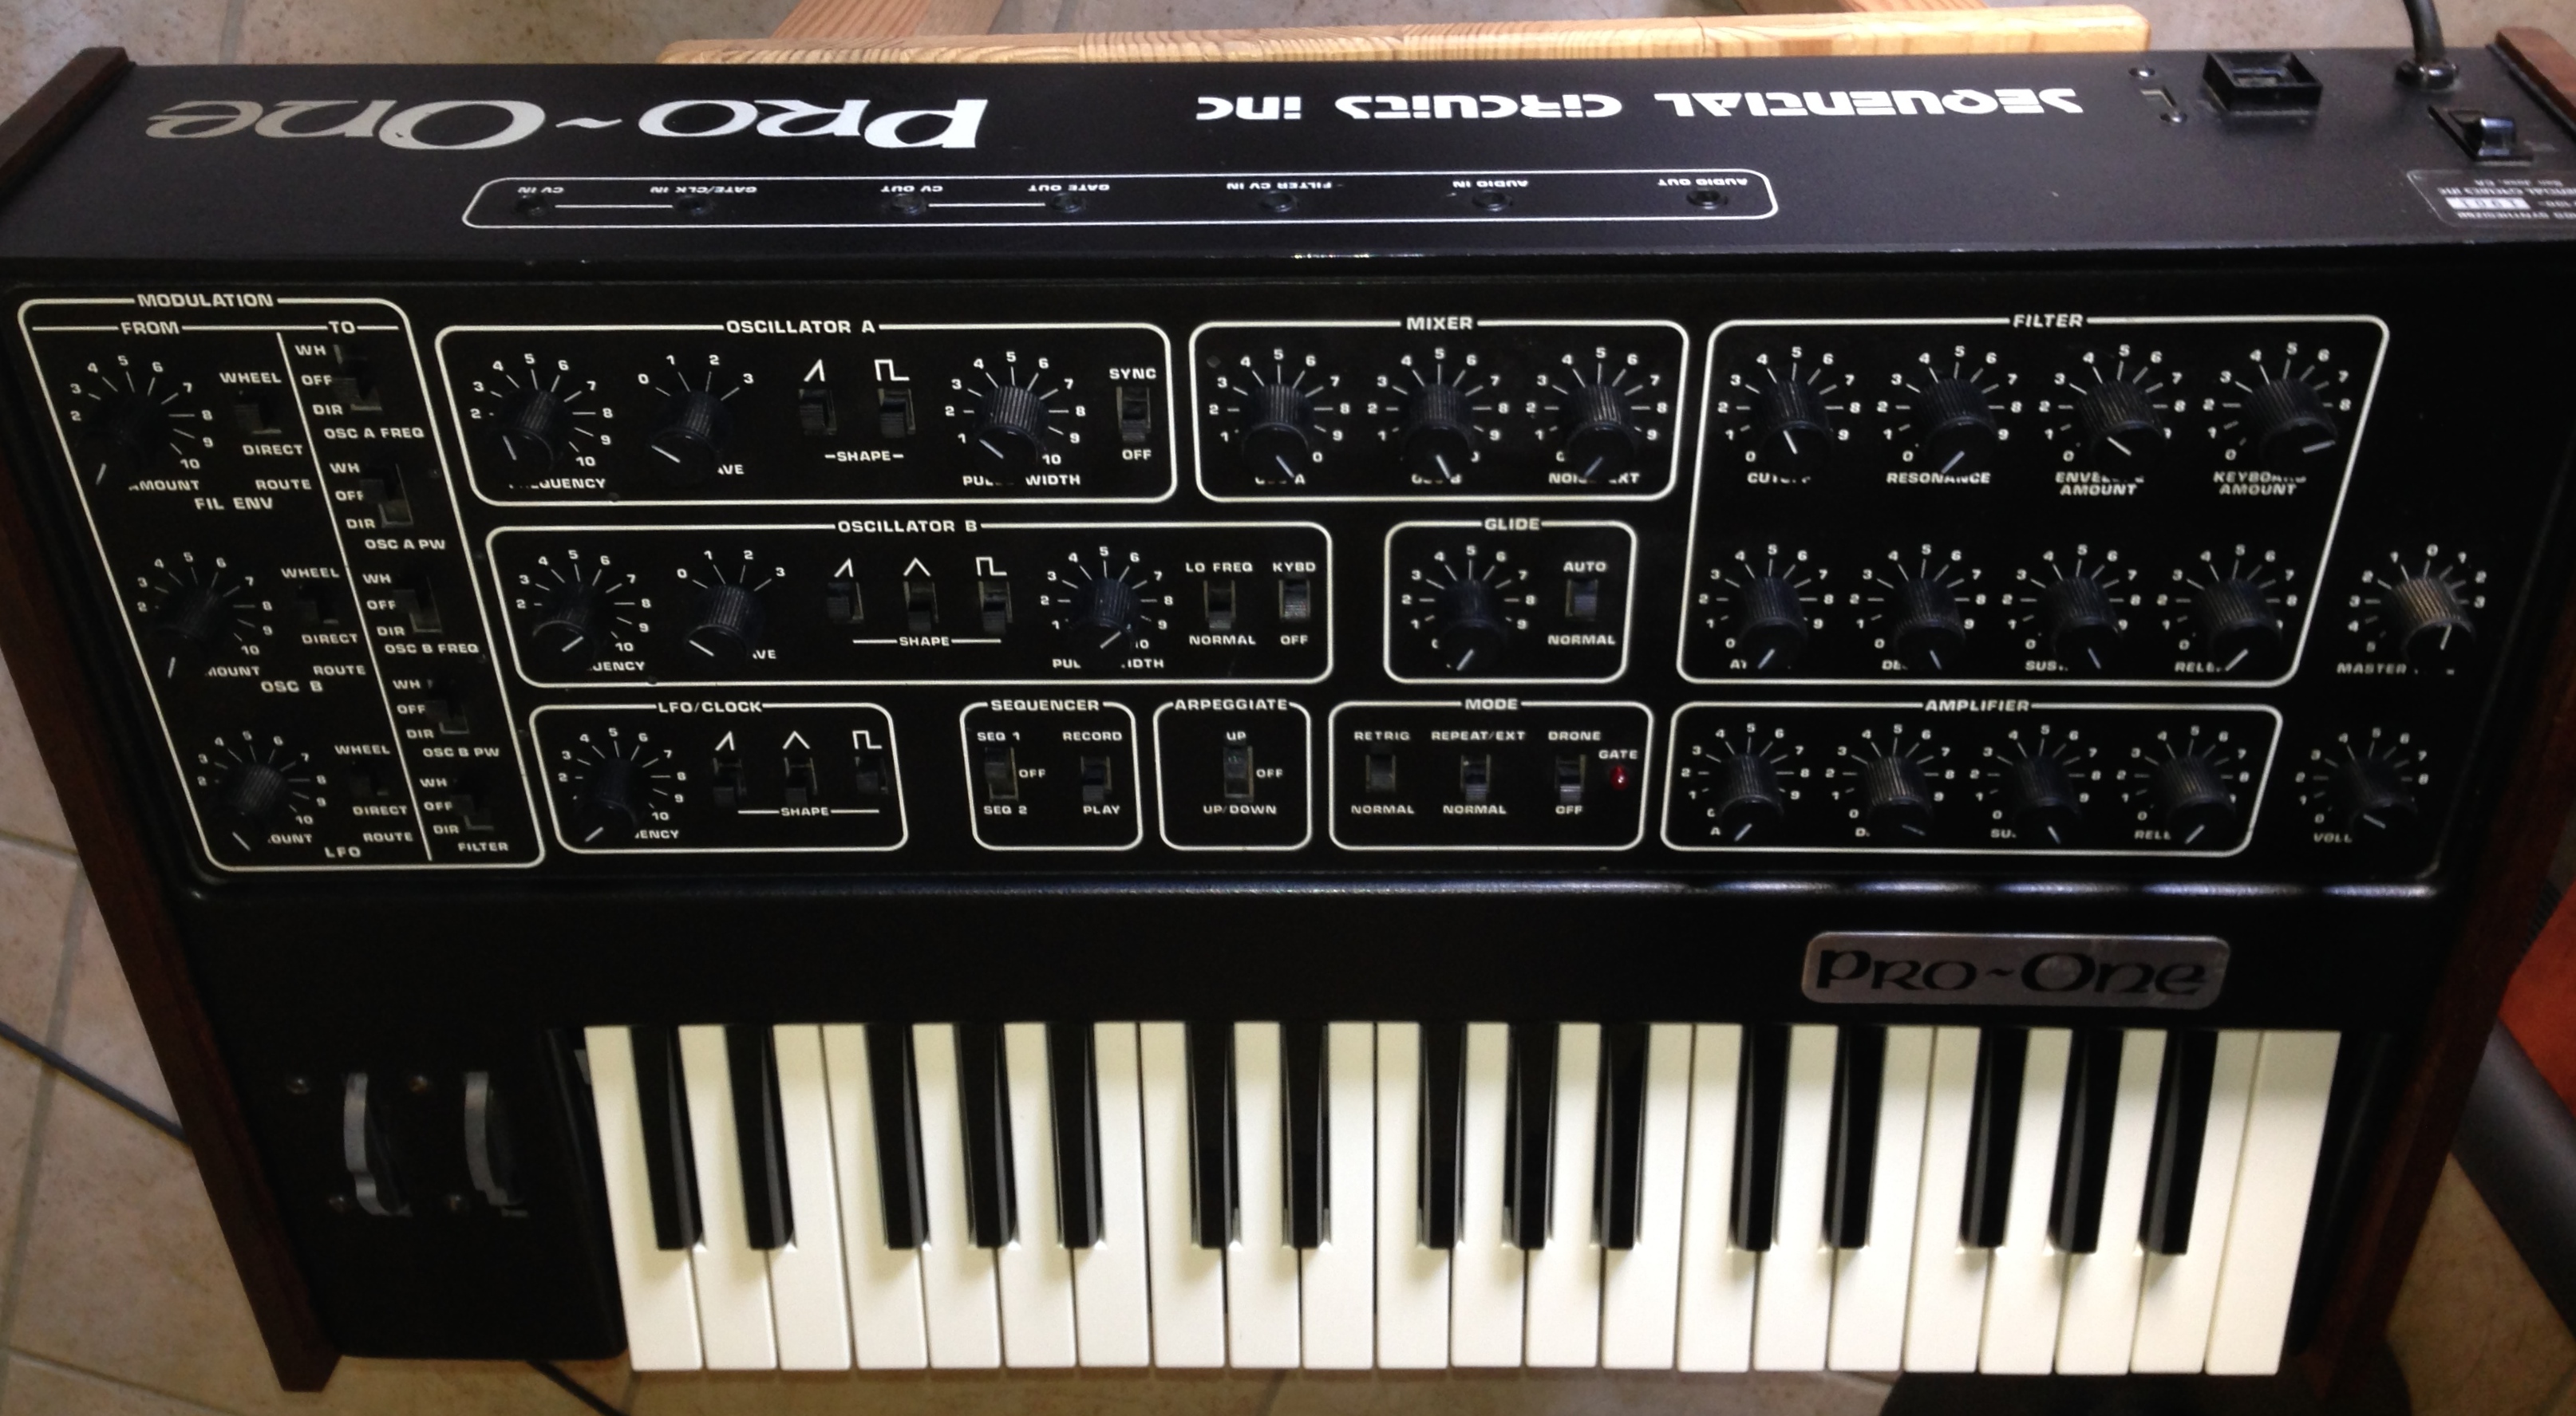 sequential circuits pro one yazoo